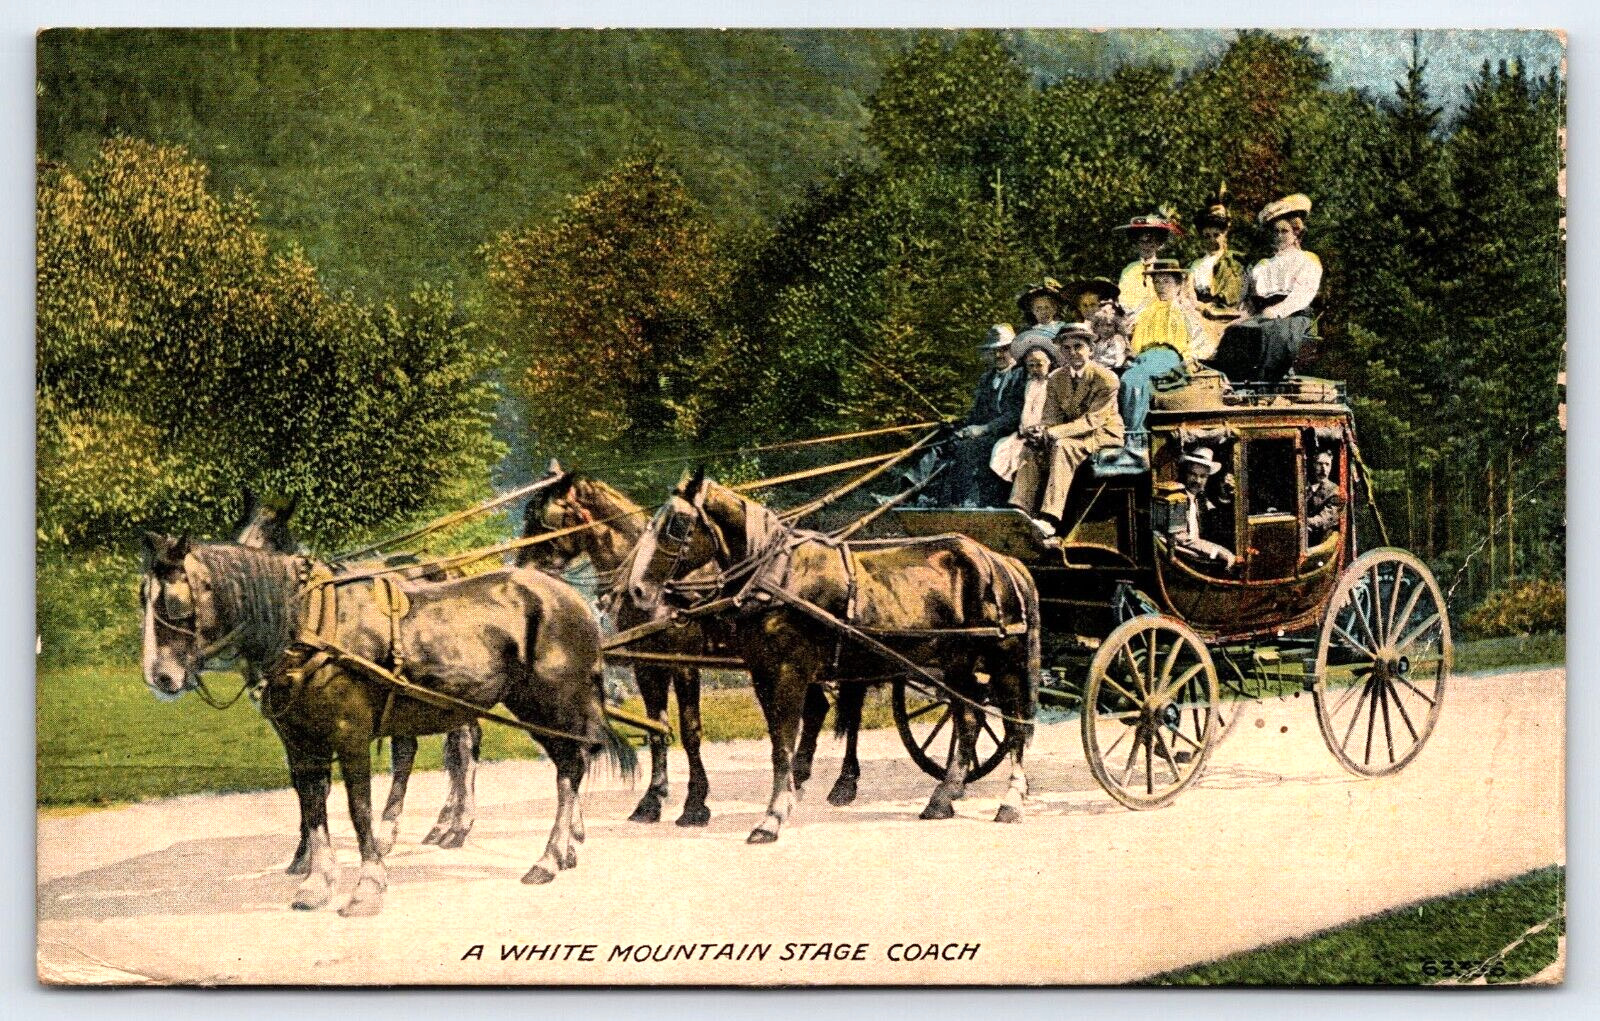 Postcard 1921 White Mountain Stage Coach 4 Horse Hitch Full of Passengers A14